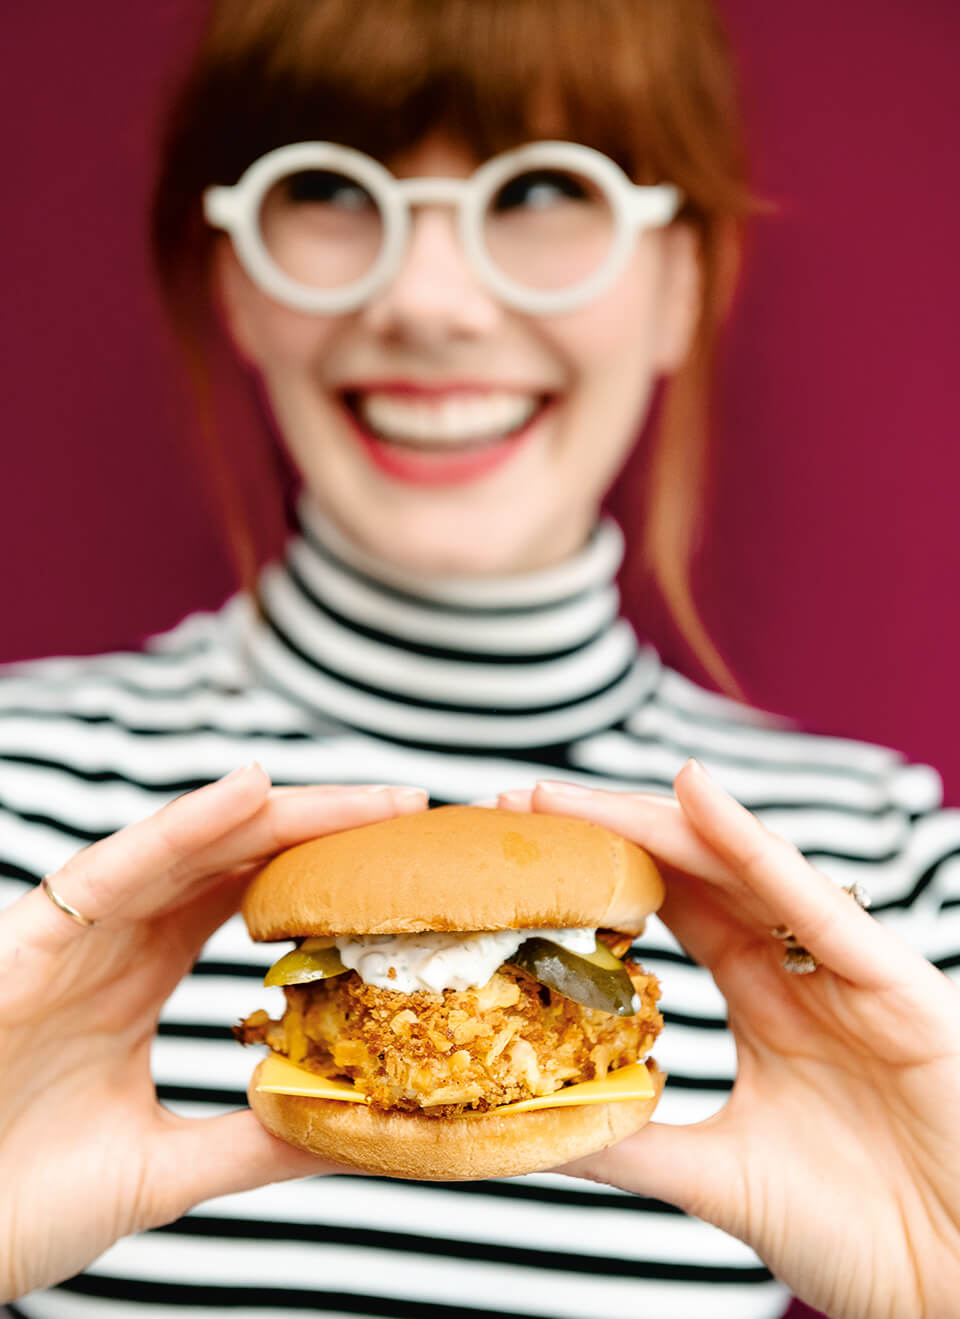 A woman, Mary Berg, holds a fried fish sandwich in front of a red background